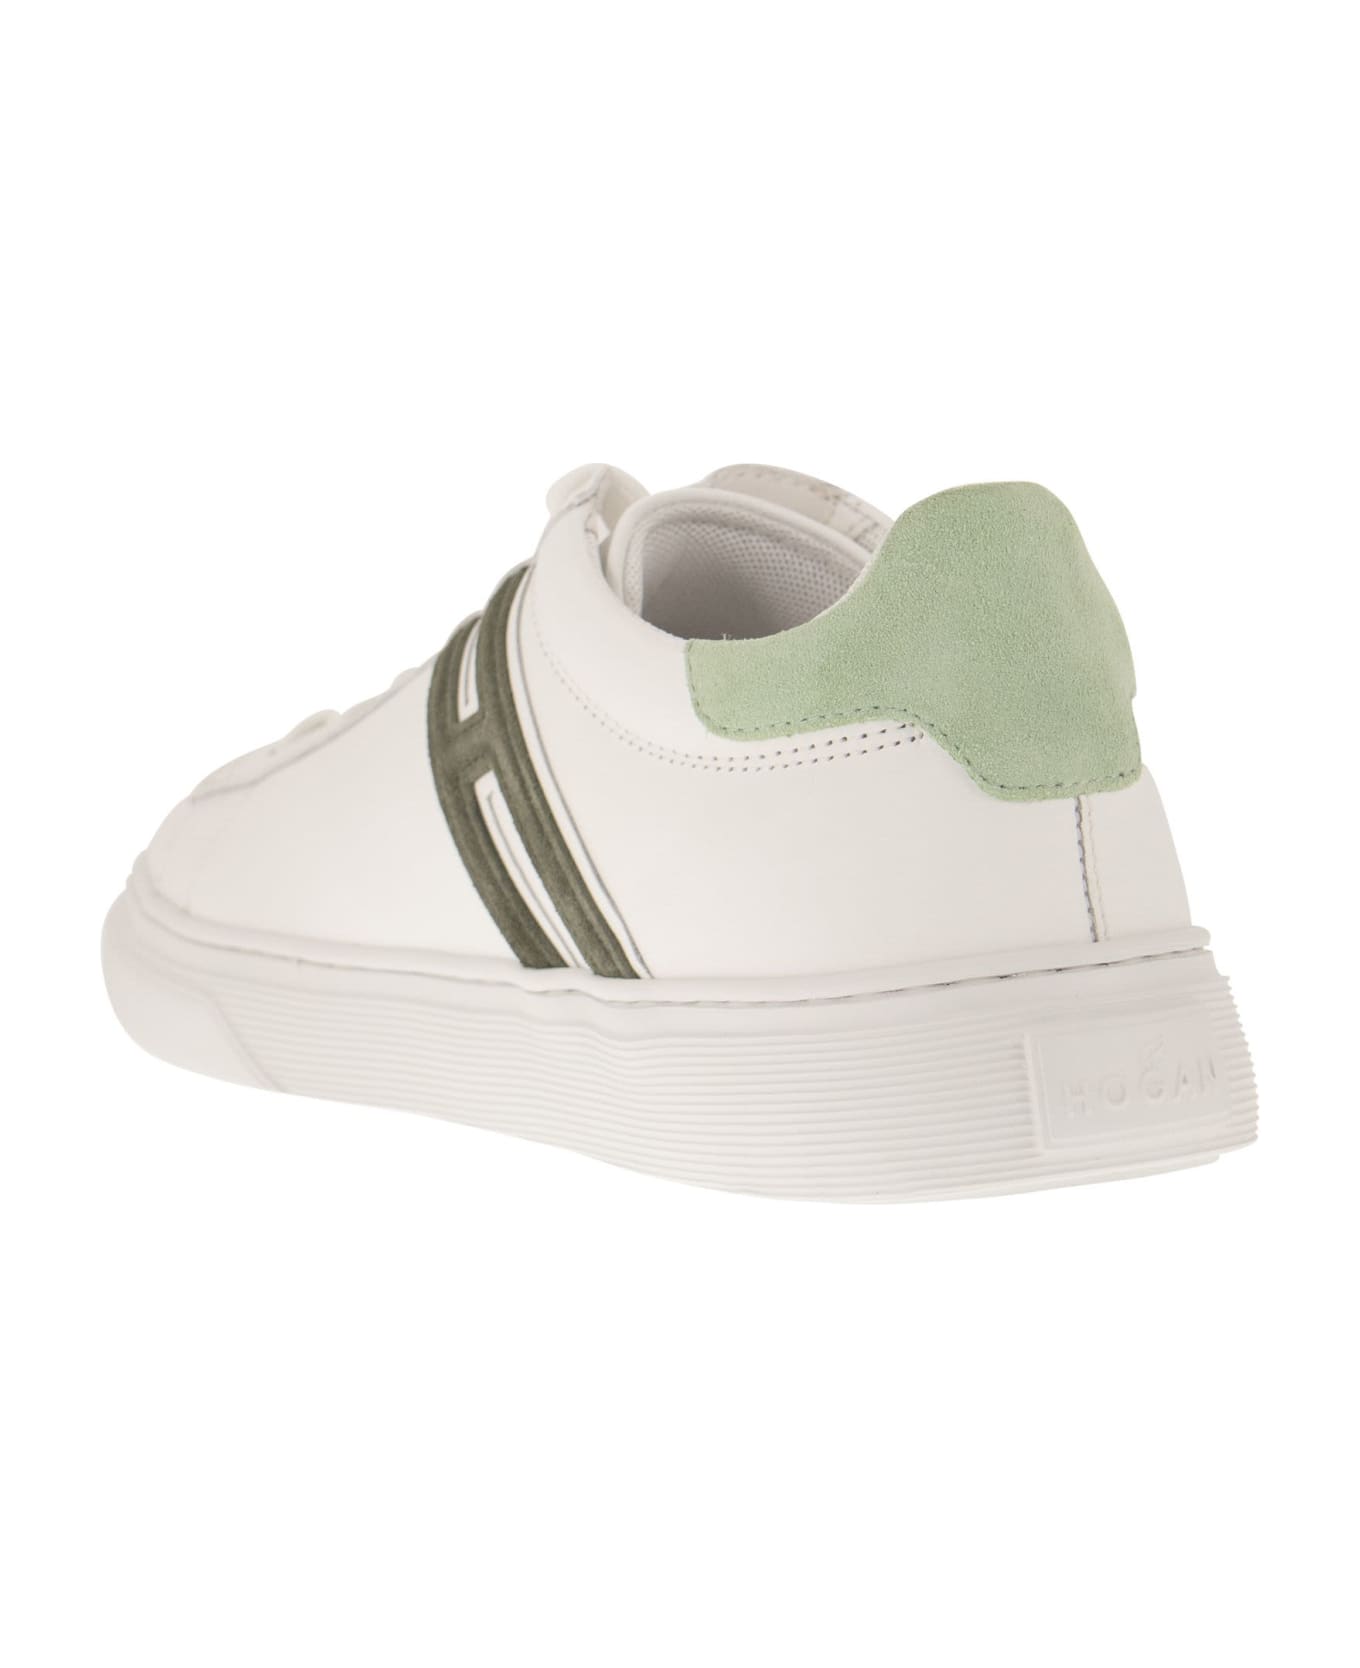 Hogan Sneakers "h365" In Leather - Green/white